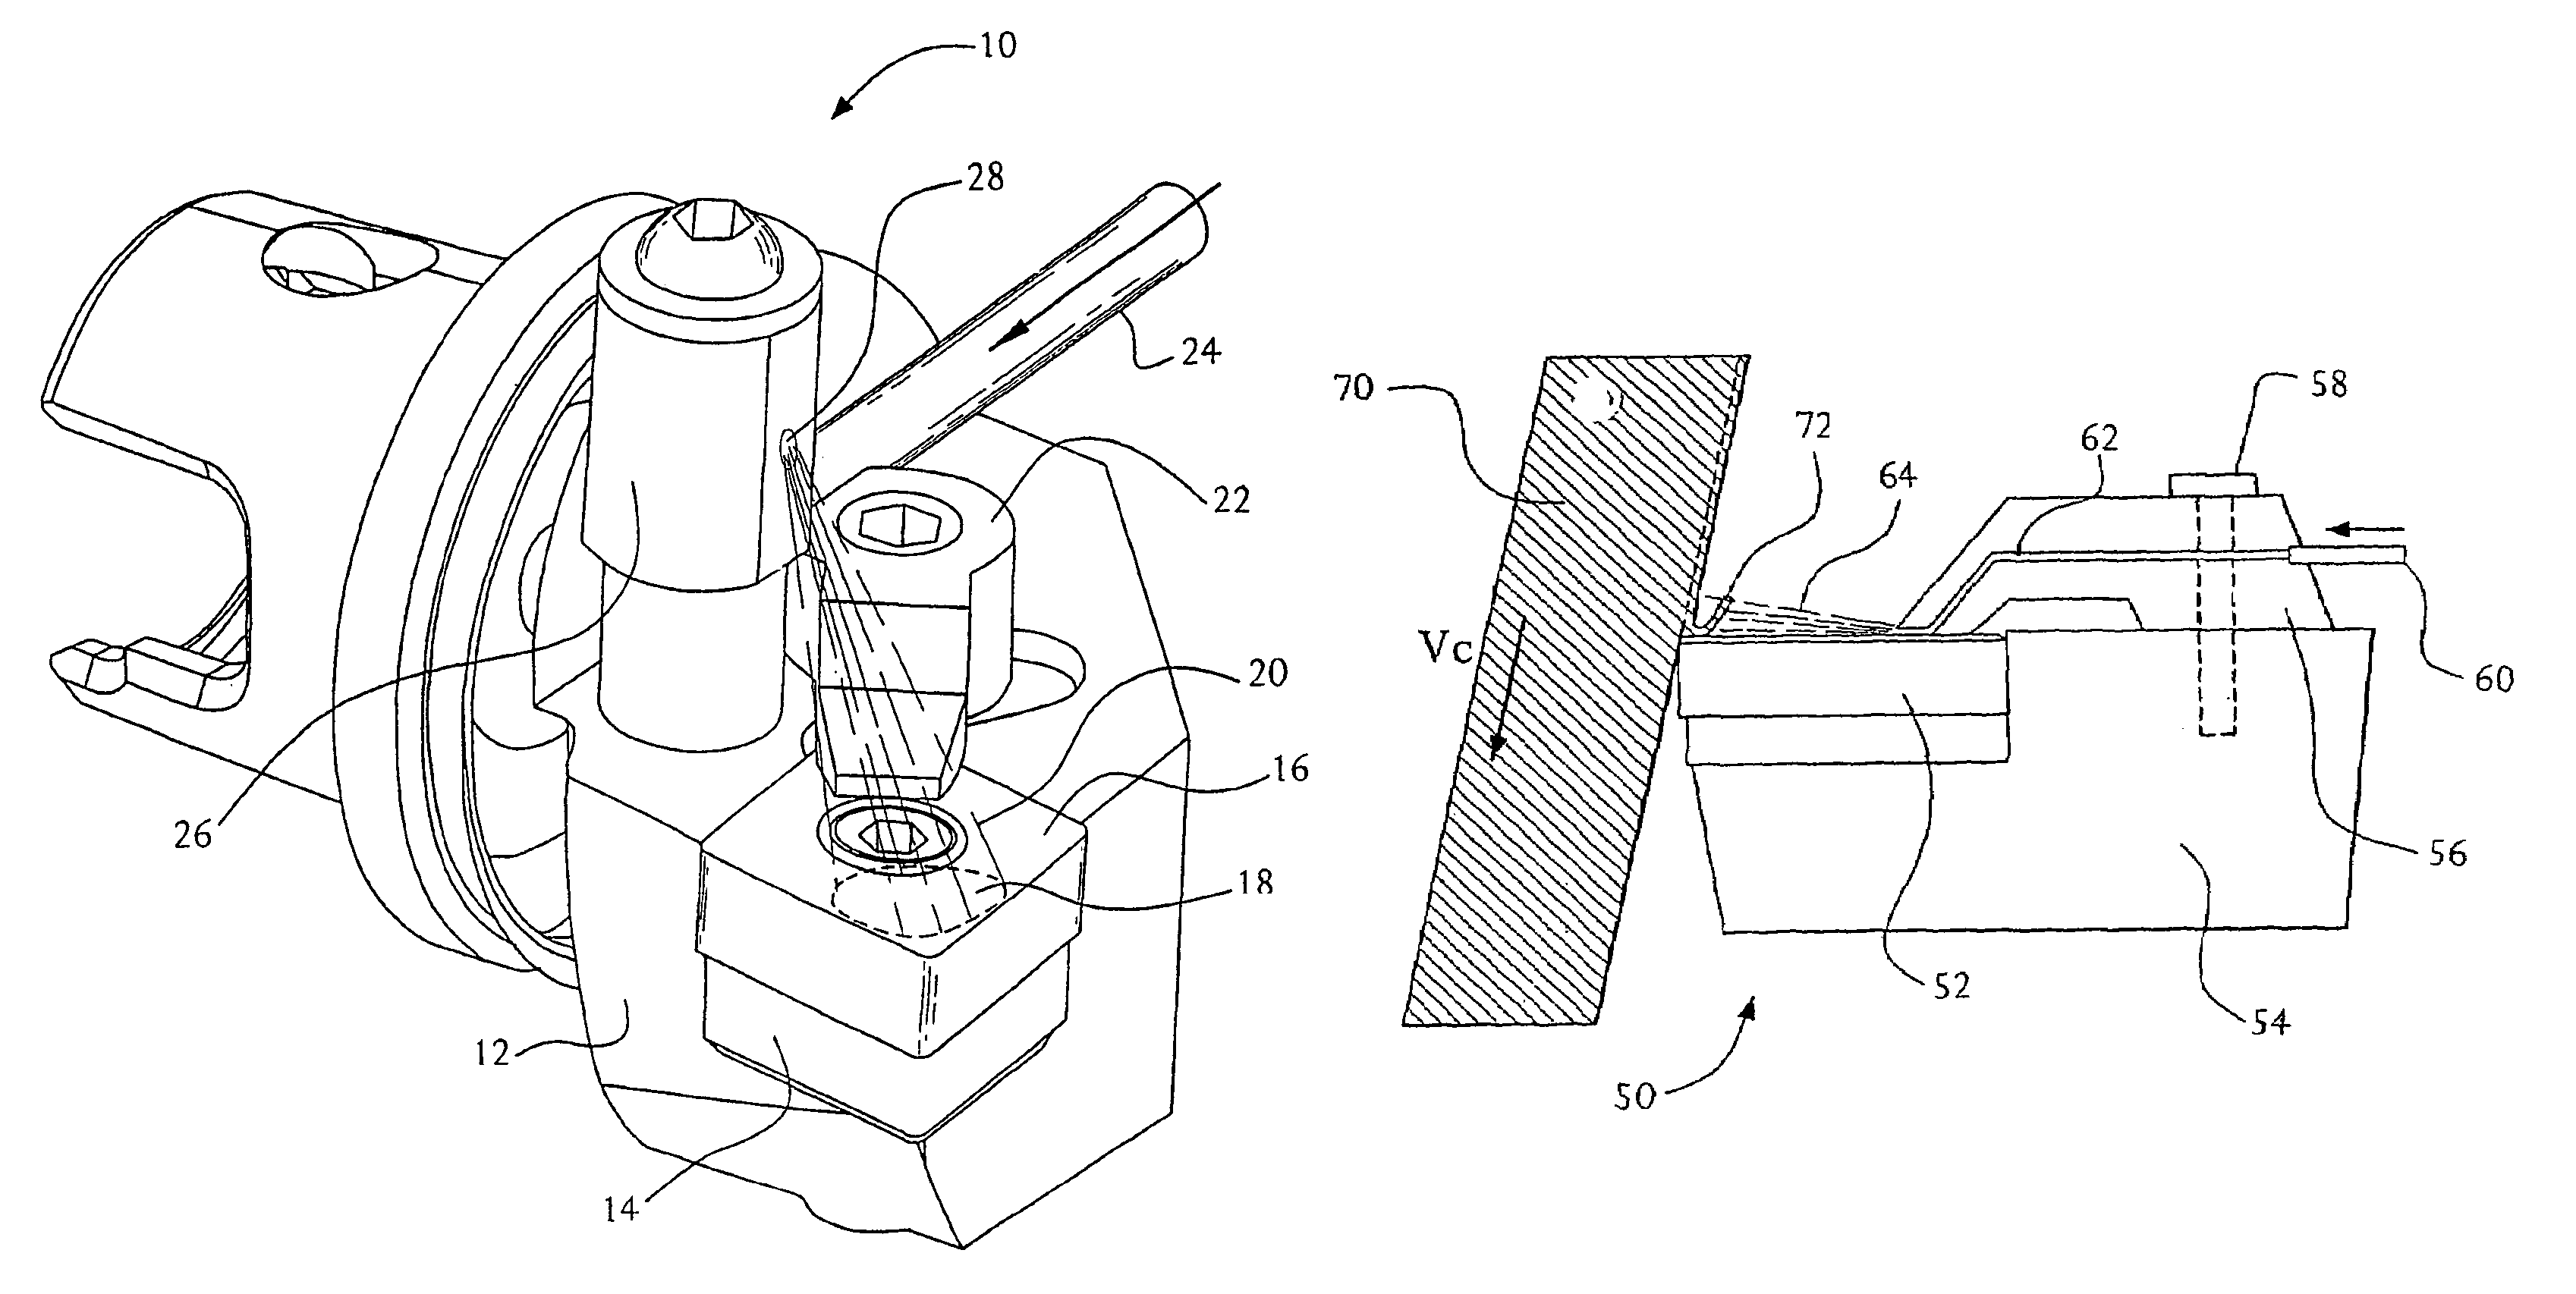 Apparatus and method for machining with cryogenically cooled oxide-containing ceramic cutting tools